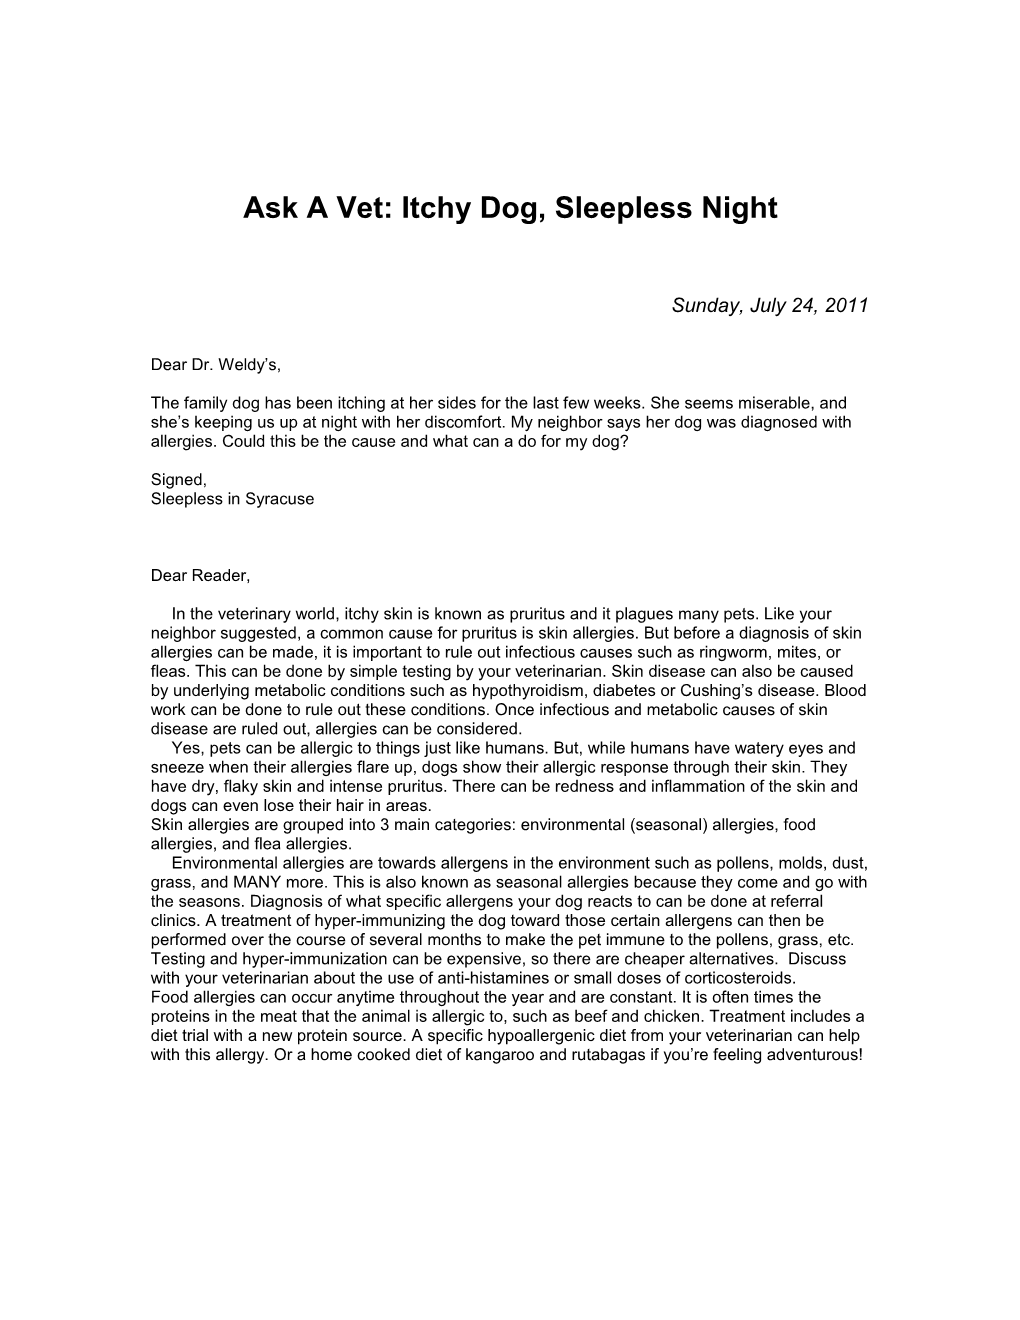 Ask a Vet: Itchy Dog, Sleepless Night